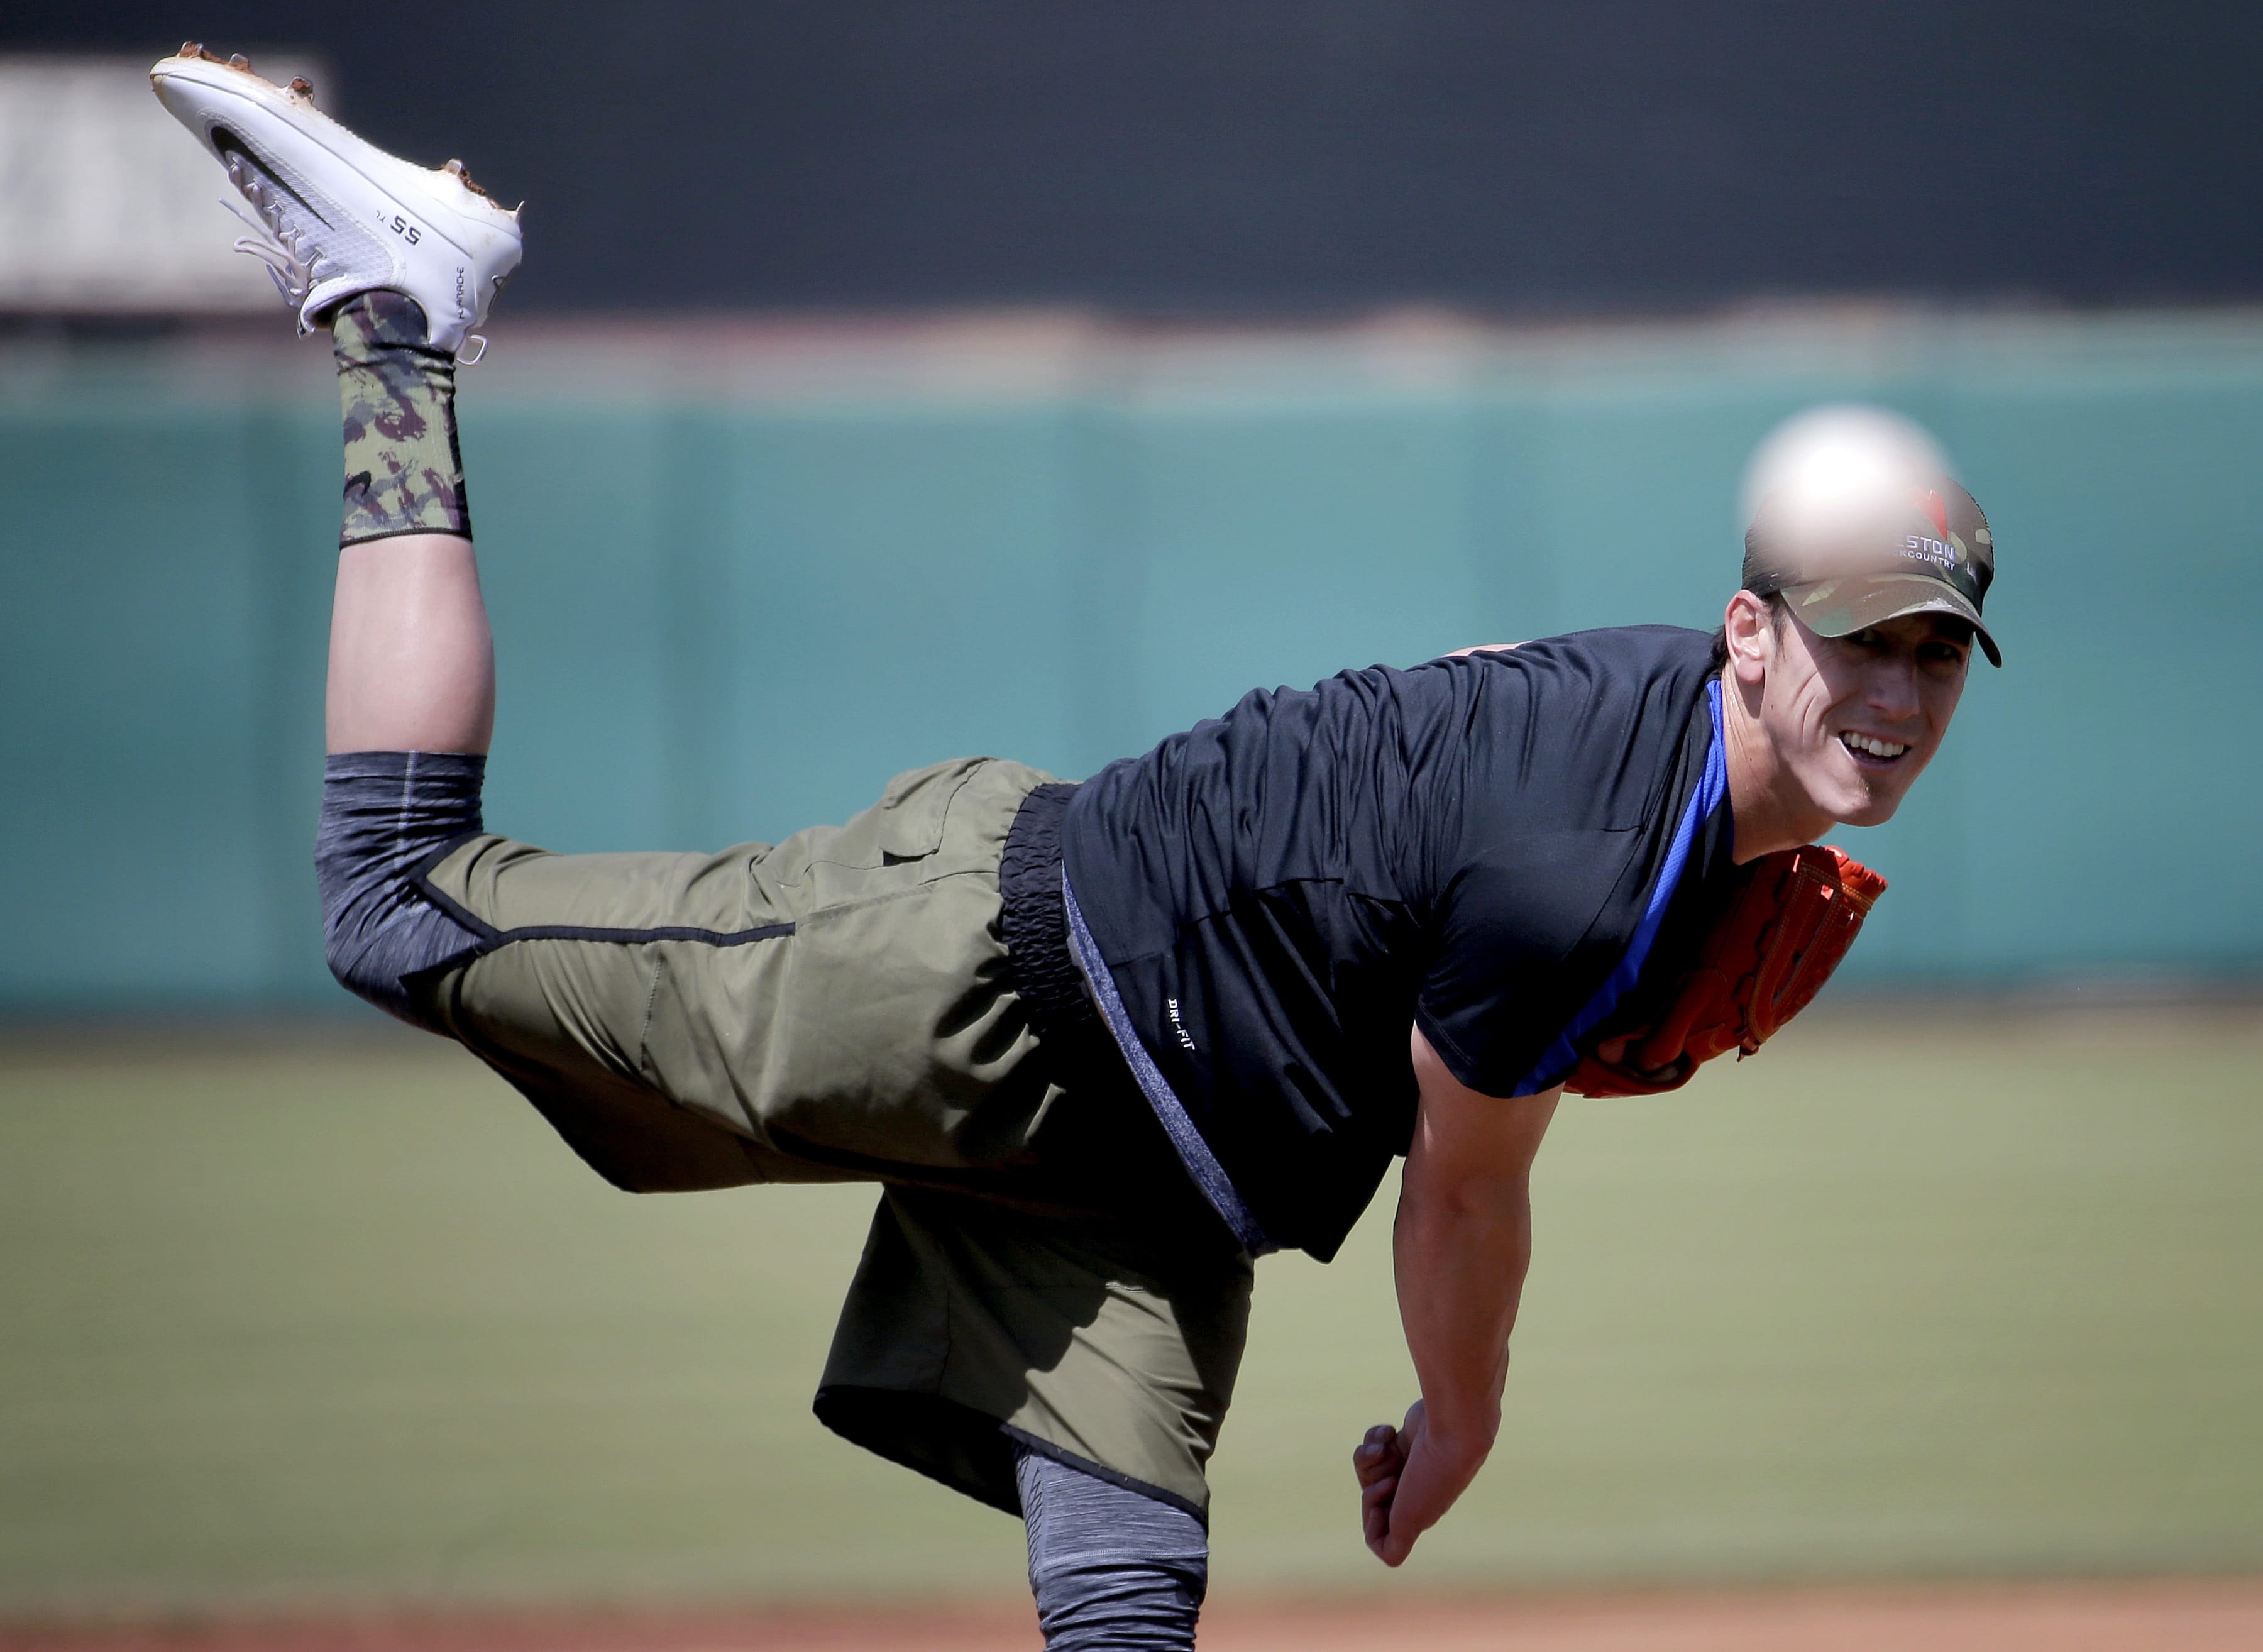 Pitcher Tim Lincecum throws for MLB baseball scouts, Friday, May 6, 2016, at Scottsdale Stadium in Scottsdale, Ariz. The former two-time Cy Young award winner is currently a free agent working his way back from hip surgery.